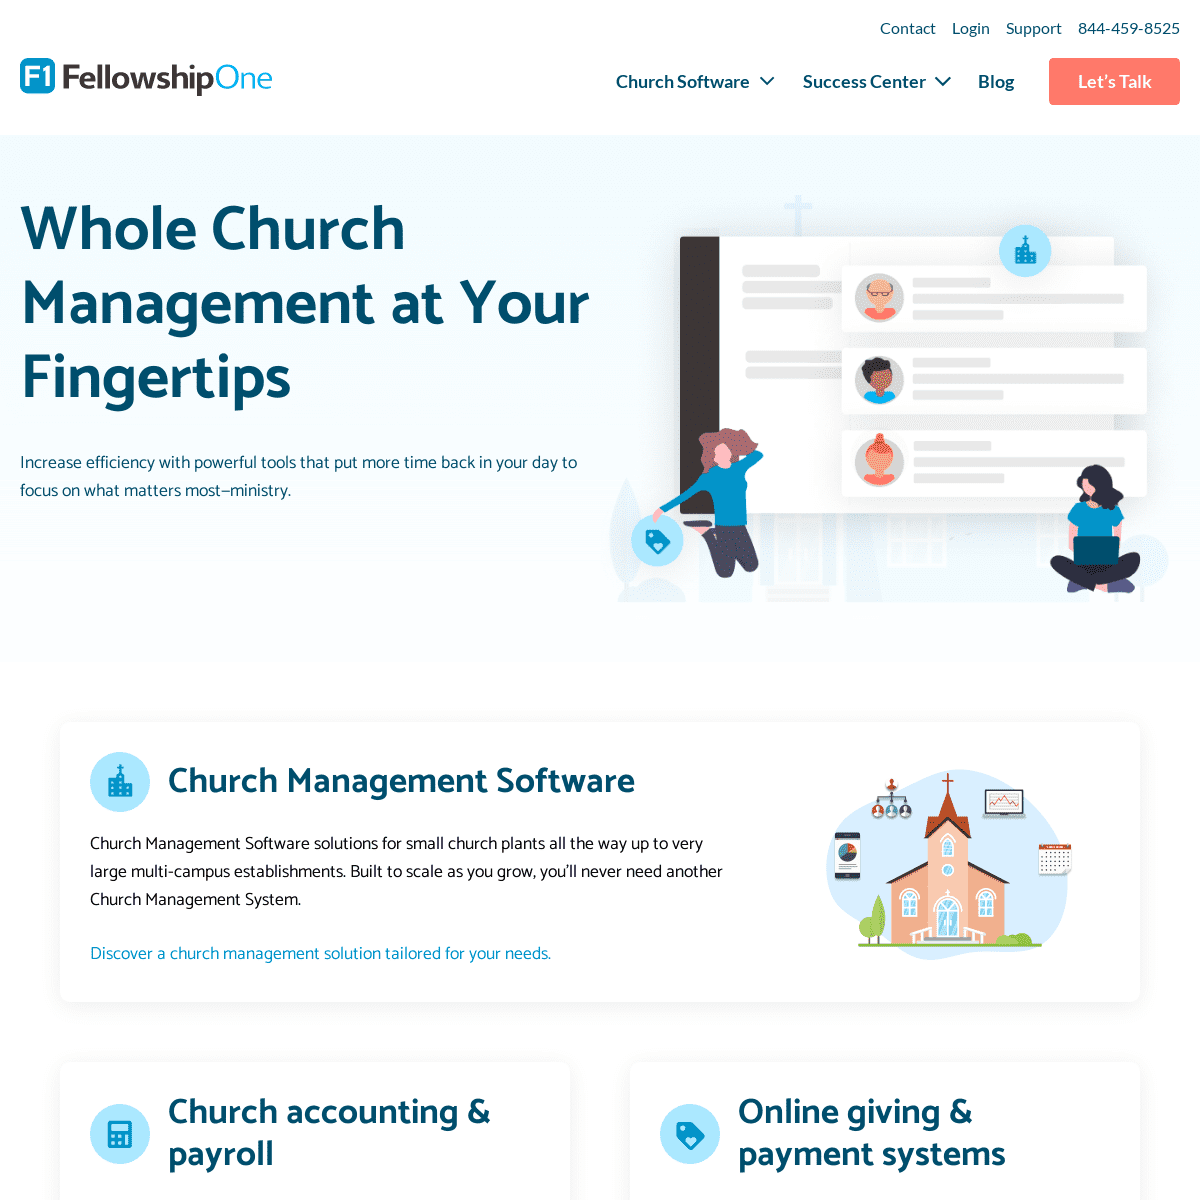 Organize Your Church Today With Software By FellowshipOne